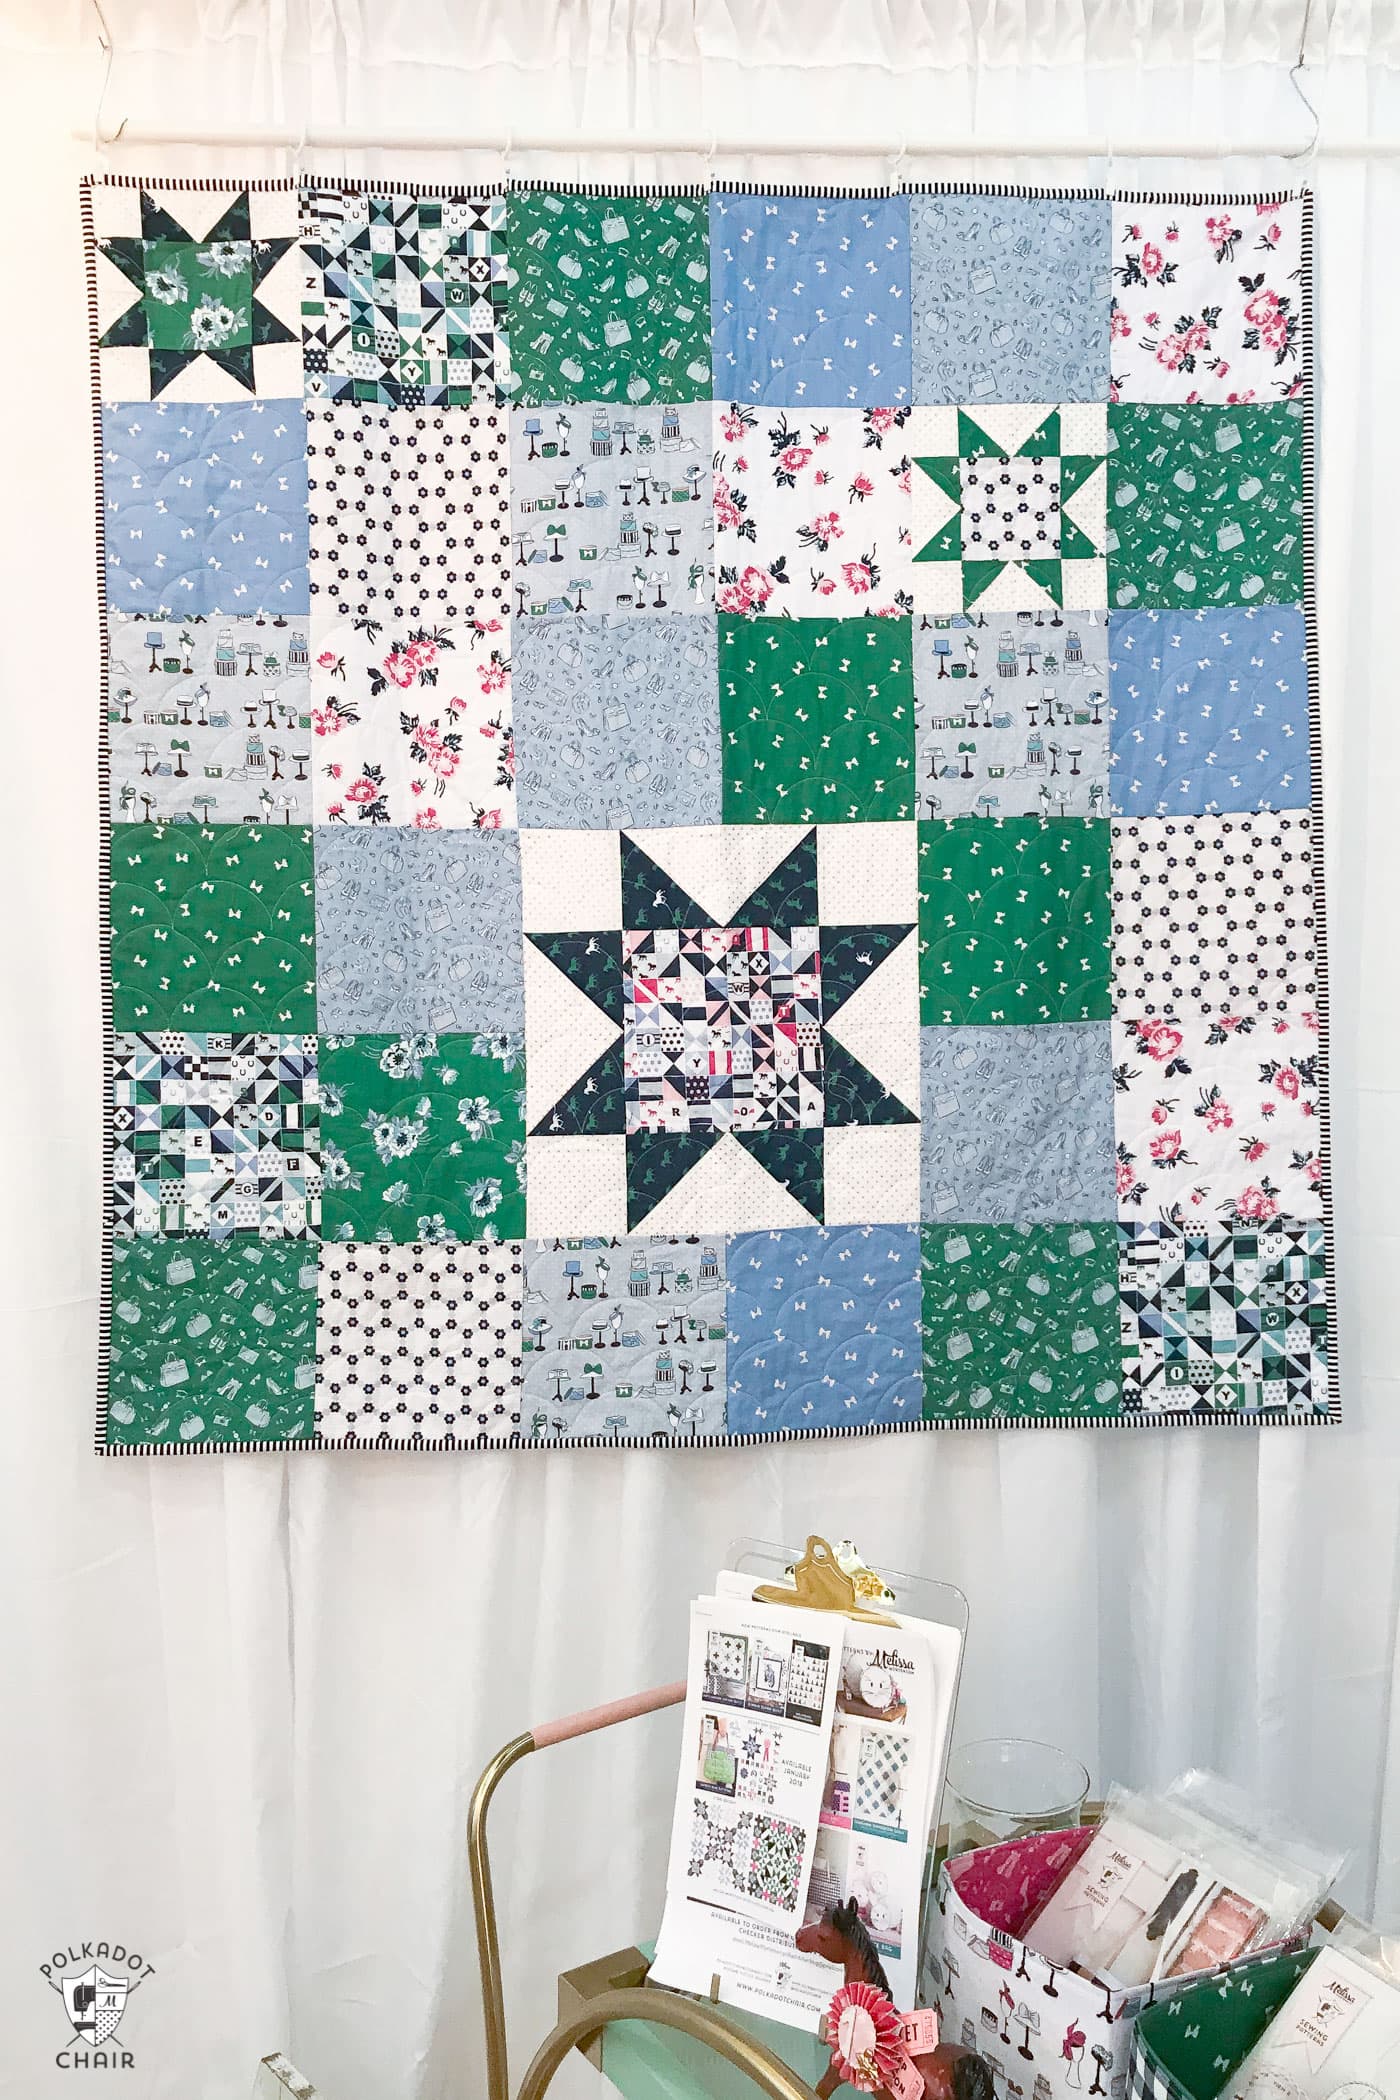 Free pattern for a Simple Sawtooth Star Baby Quilt - so fast to stitch up - great for a beginning quilter! #quilts #babyquilt #beginningquilter #quilttutorial